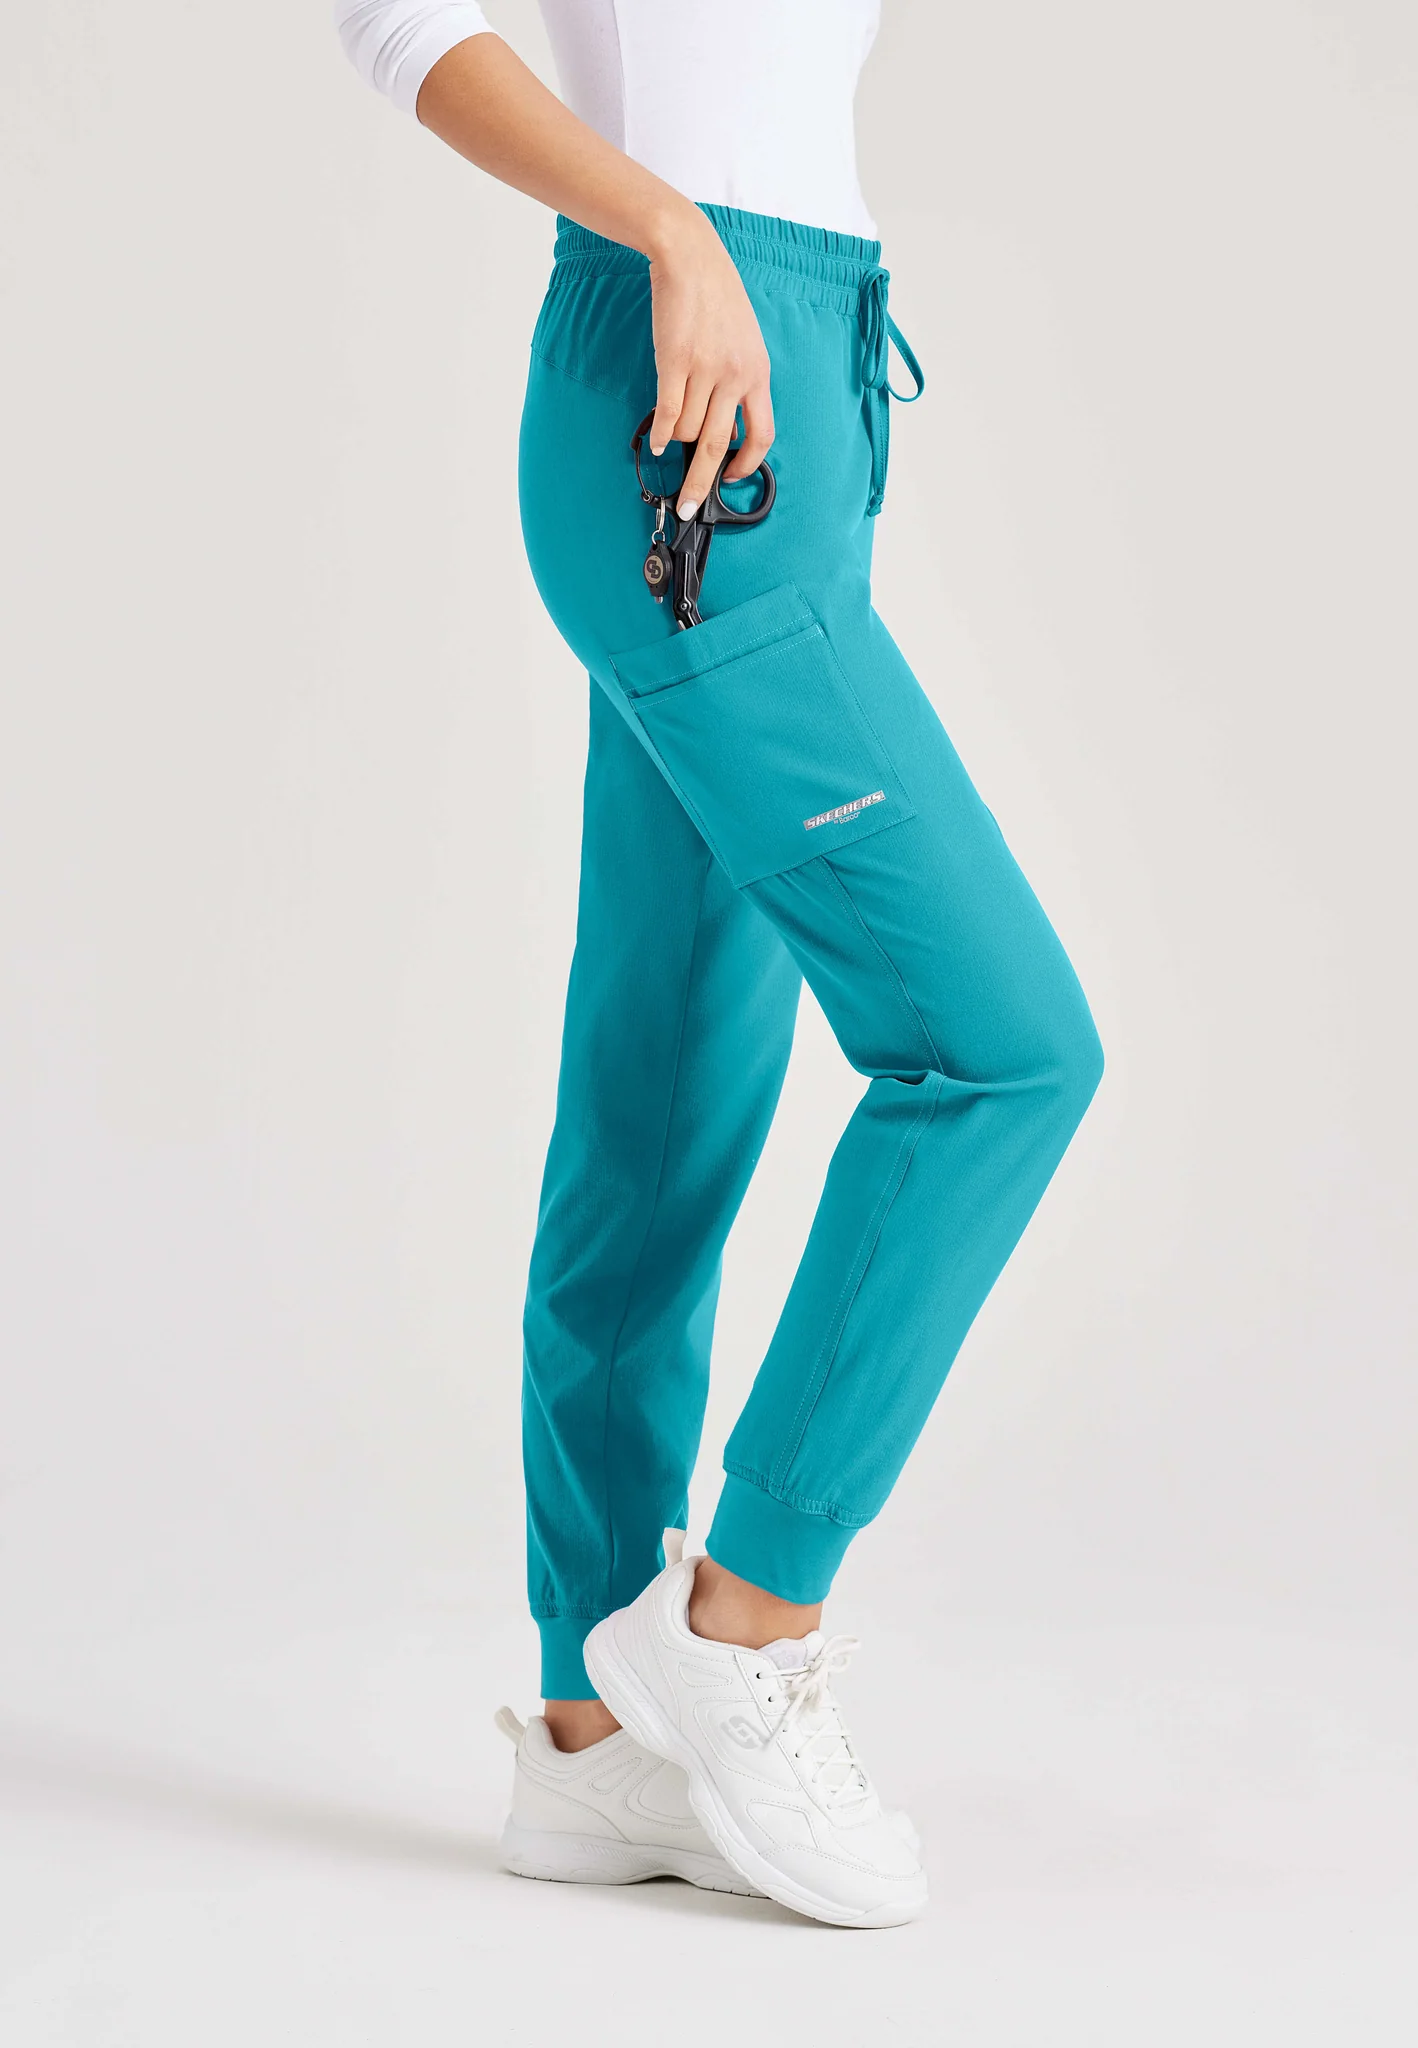 Scrubs Nyack on Instagram: Discover the perfect color palette with Skechers  by Barco! From vibrant hues to subtle shades, we've got you covered. Plus,  our relaxed fits and eco-friendly fabric ensure comfort